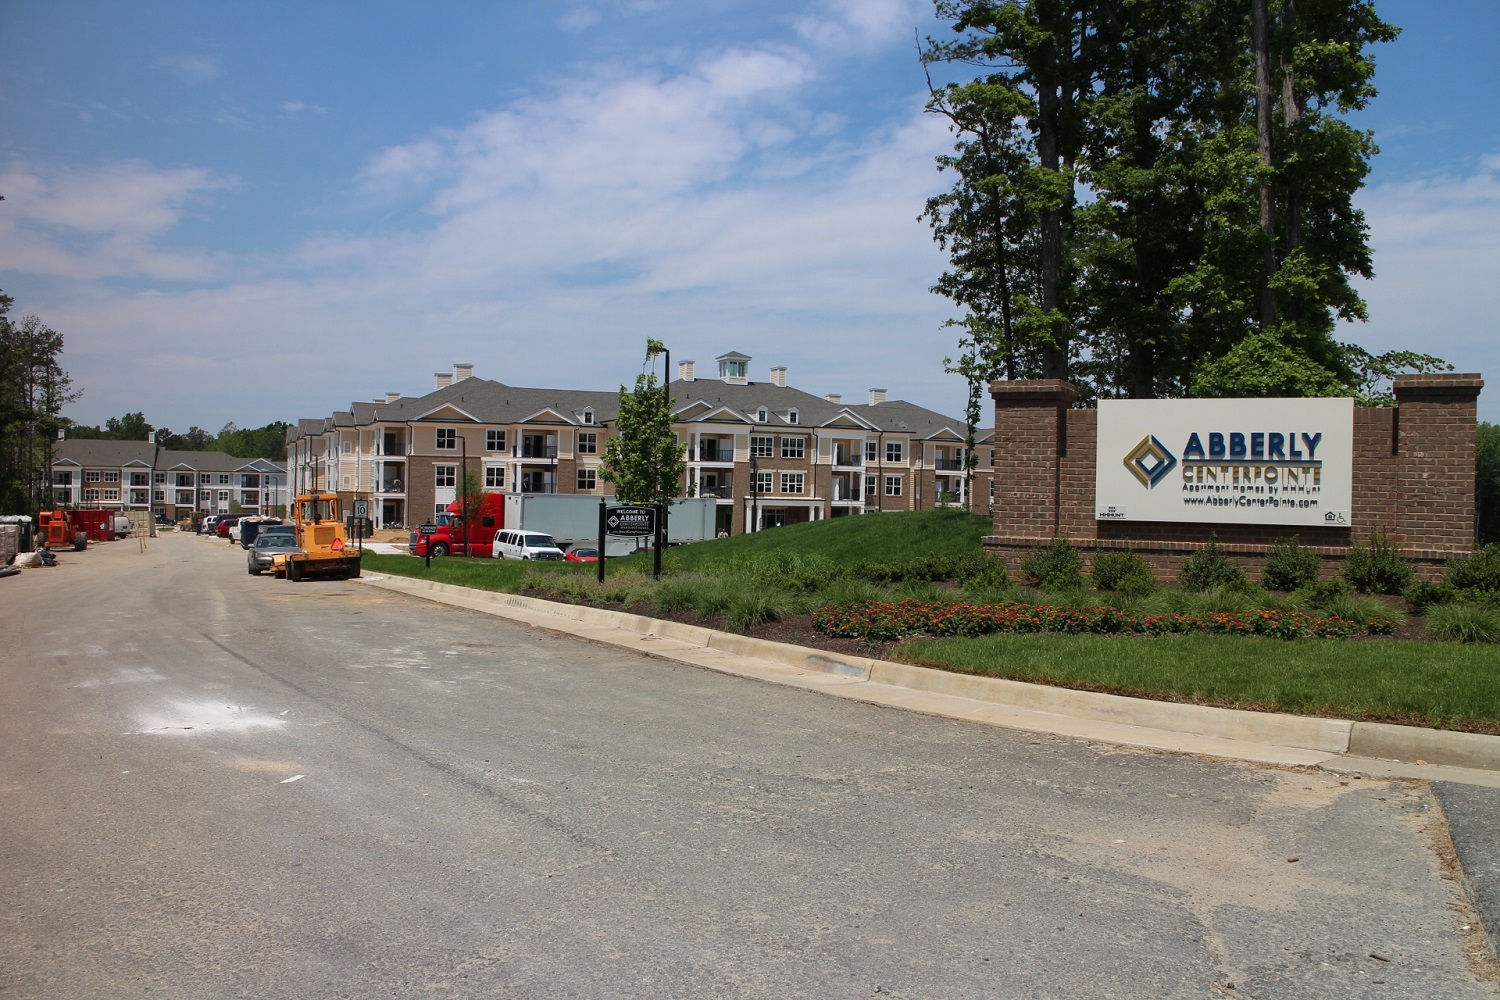 Apartments rise at CenterPointe, more in the pipeline - Richmond BizSense